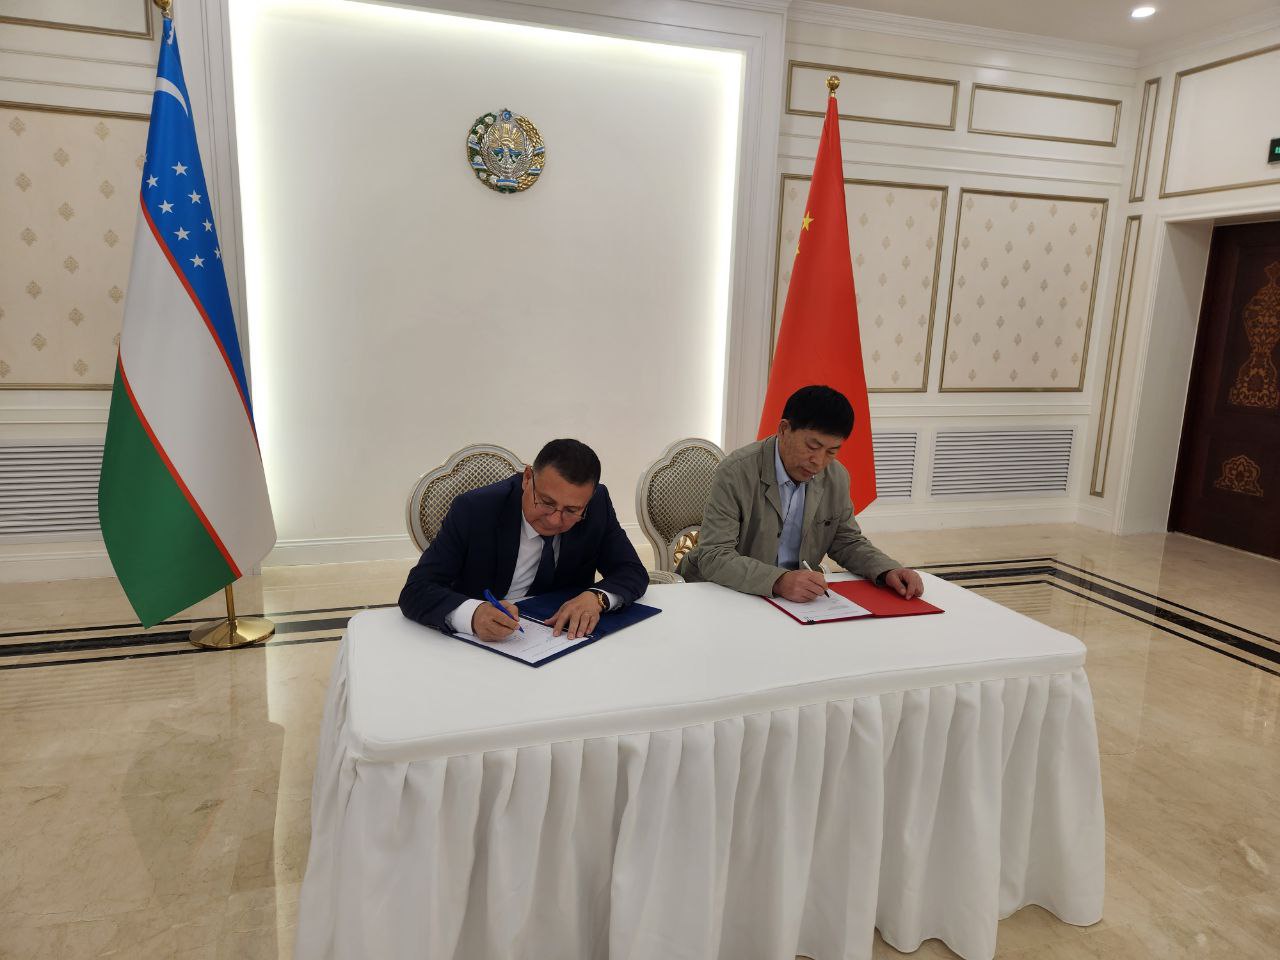 A memorandum of cooperation was signed with Shandong Academy of Sciences